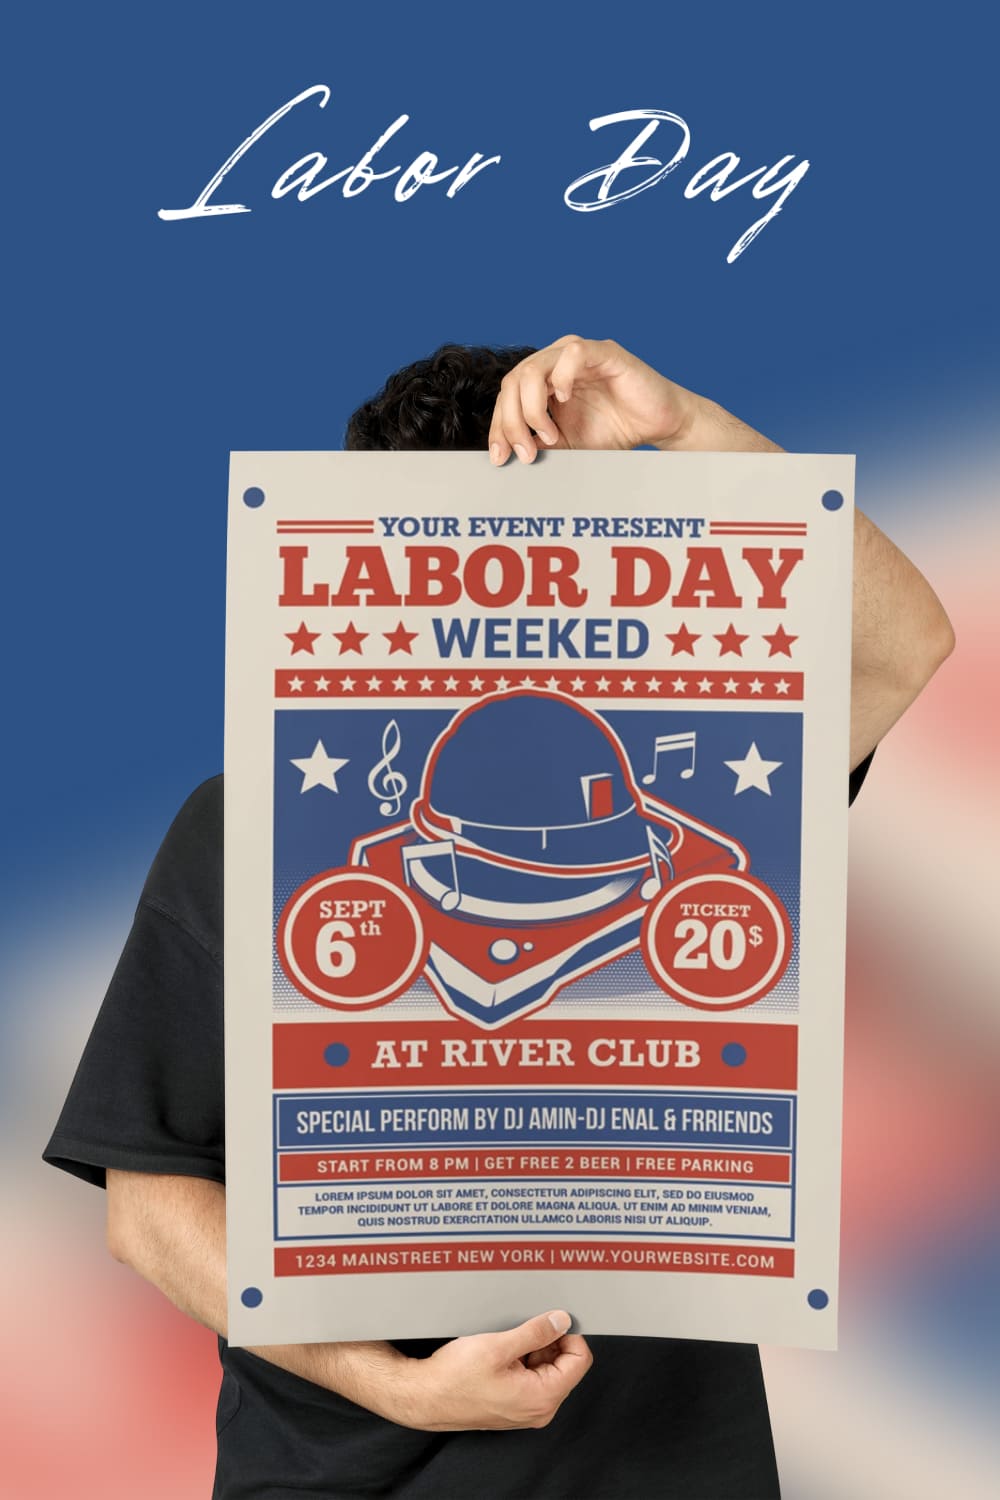 Labor Day Weekend Party Flyer - Pinterest.